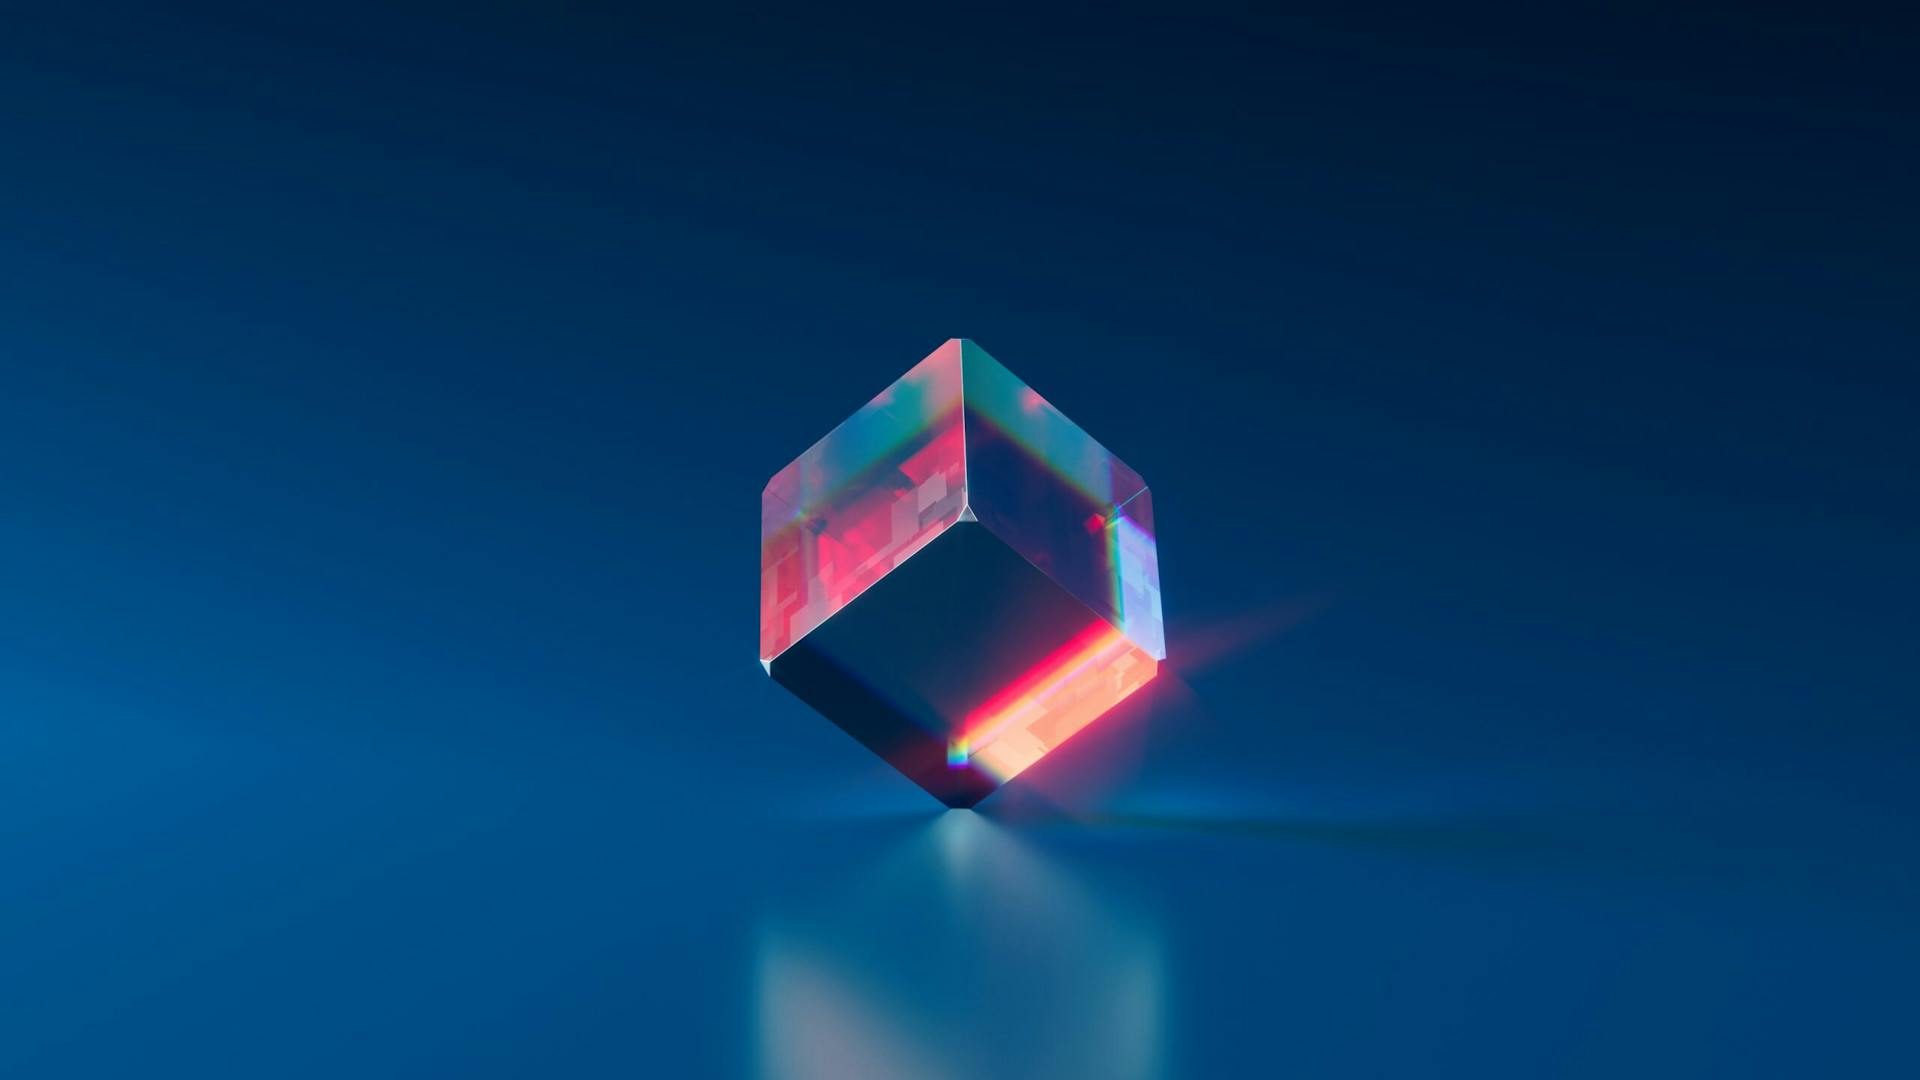 Image Showing and 3D Abstract Image of an Cube